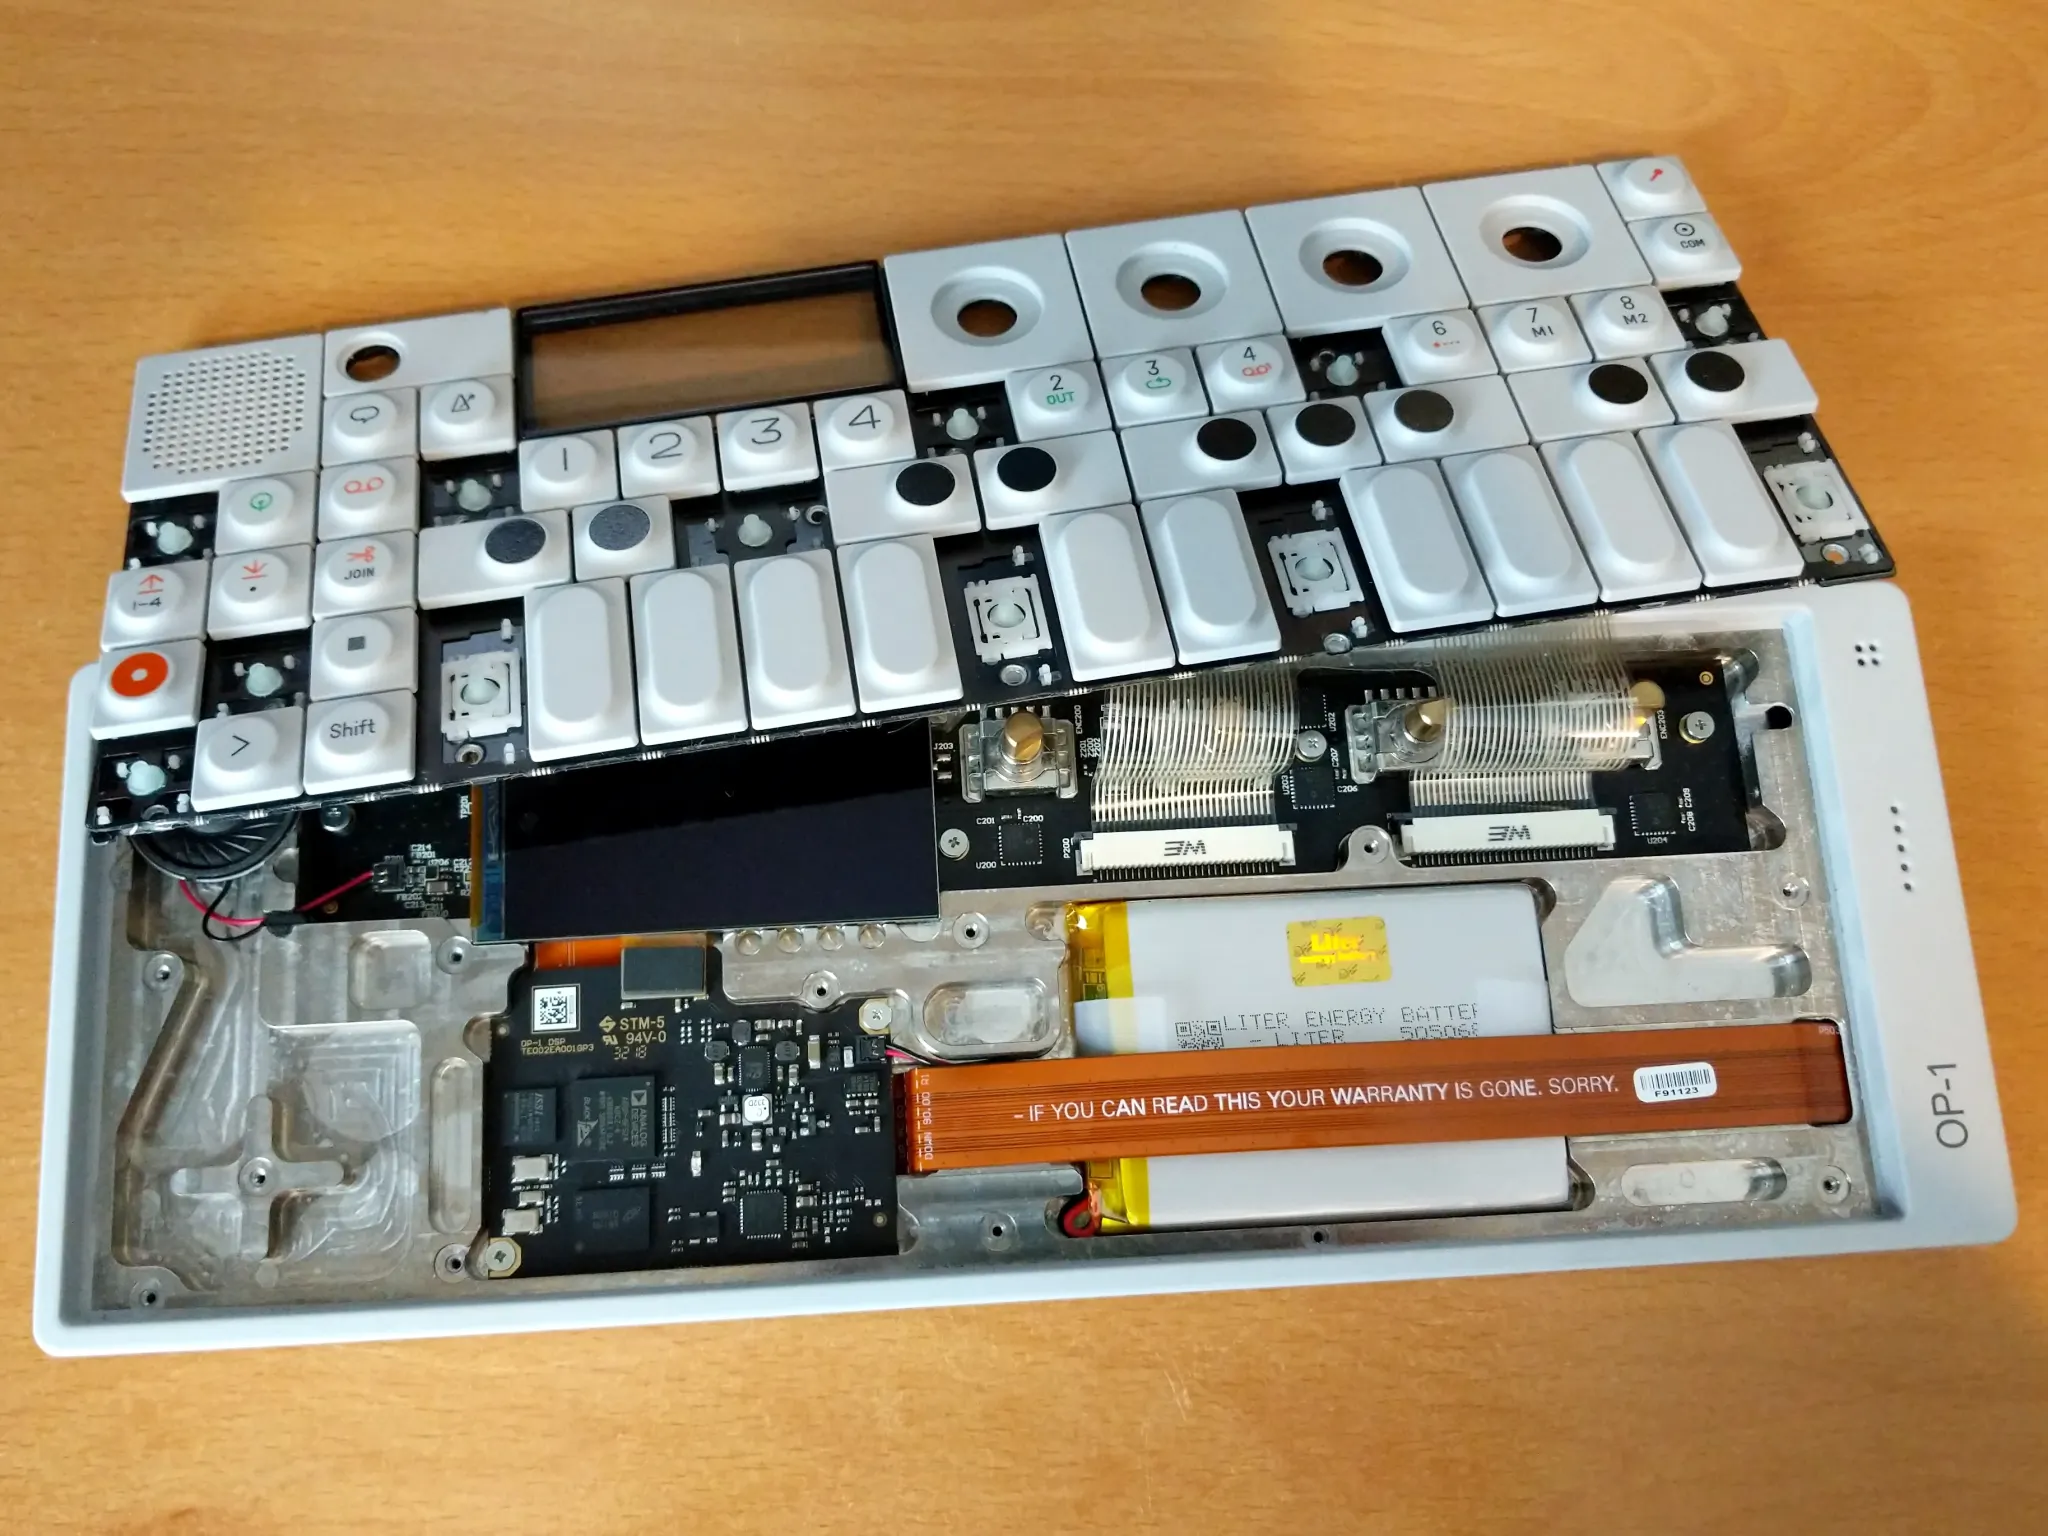 A partially disassembled OP-1. The keyboard is moved up to expose the
internal circuitry, and a cable on which is written, 'IF YOU CAN READ THIS YOUR
WARRANTY IS GONE. SORRY'